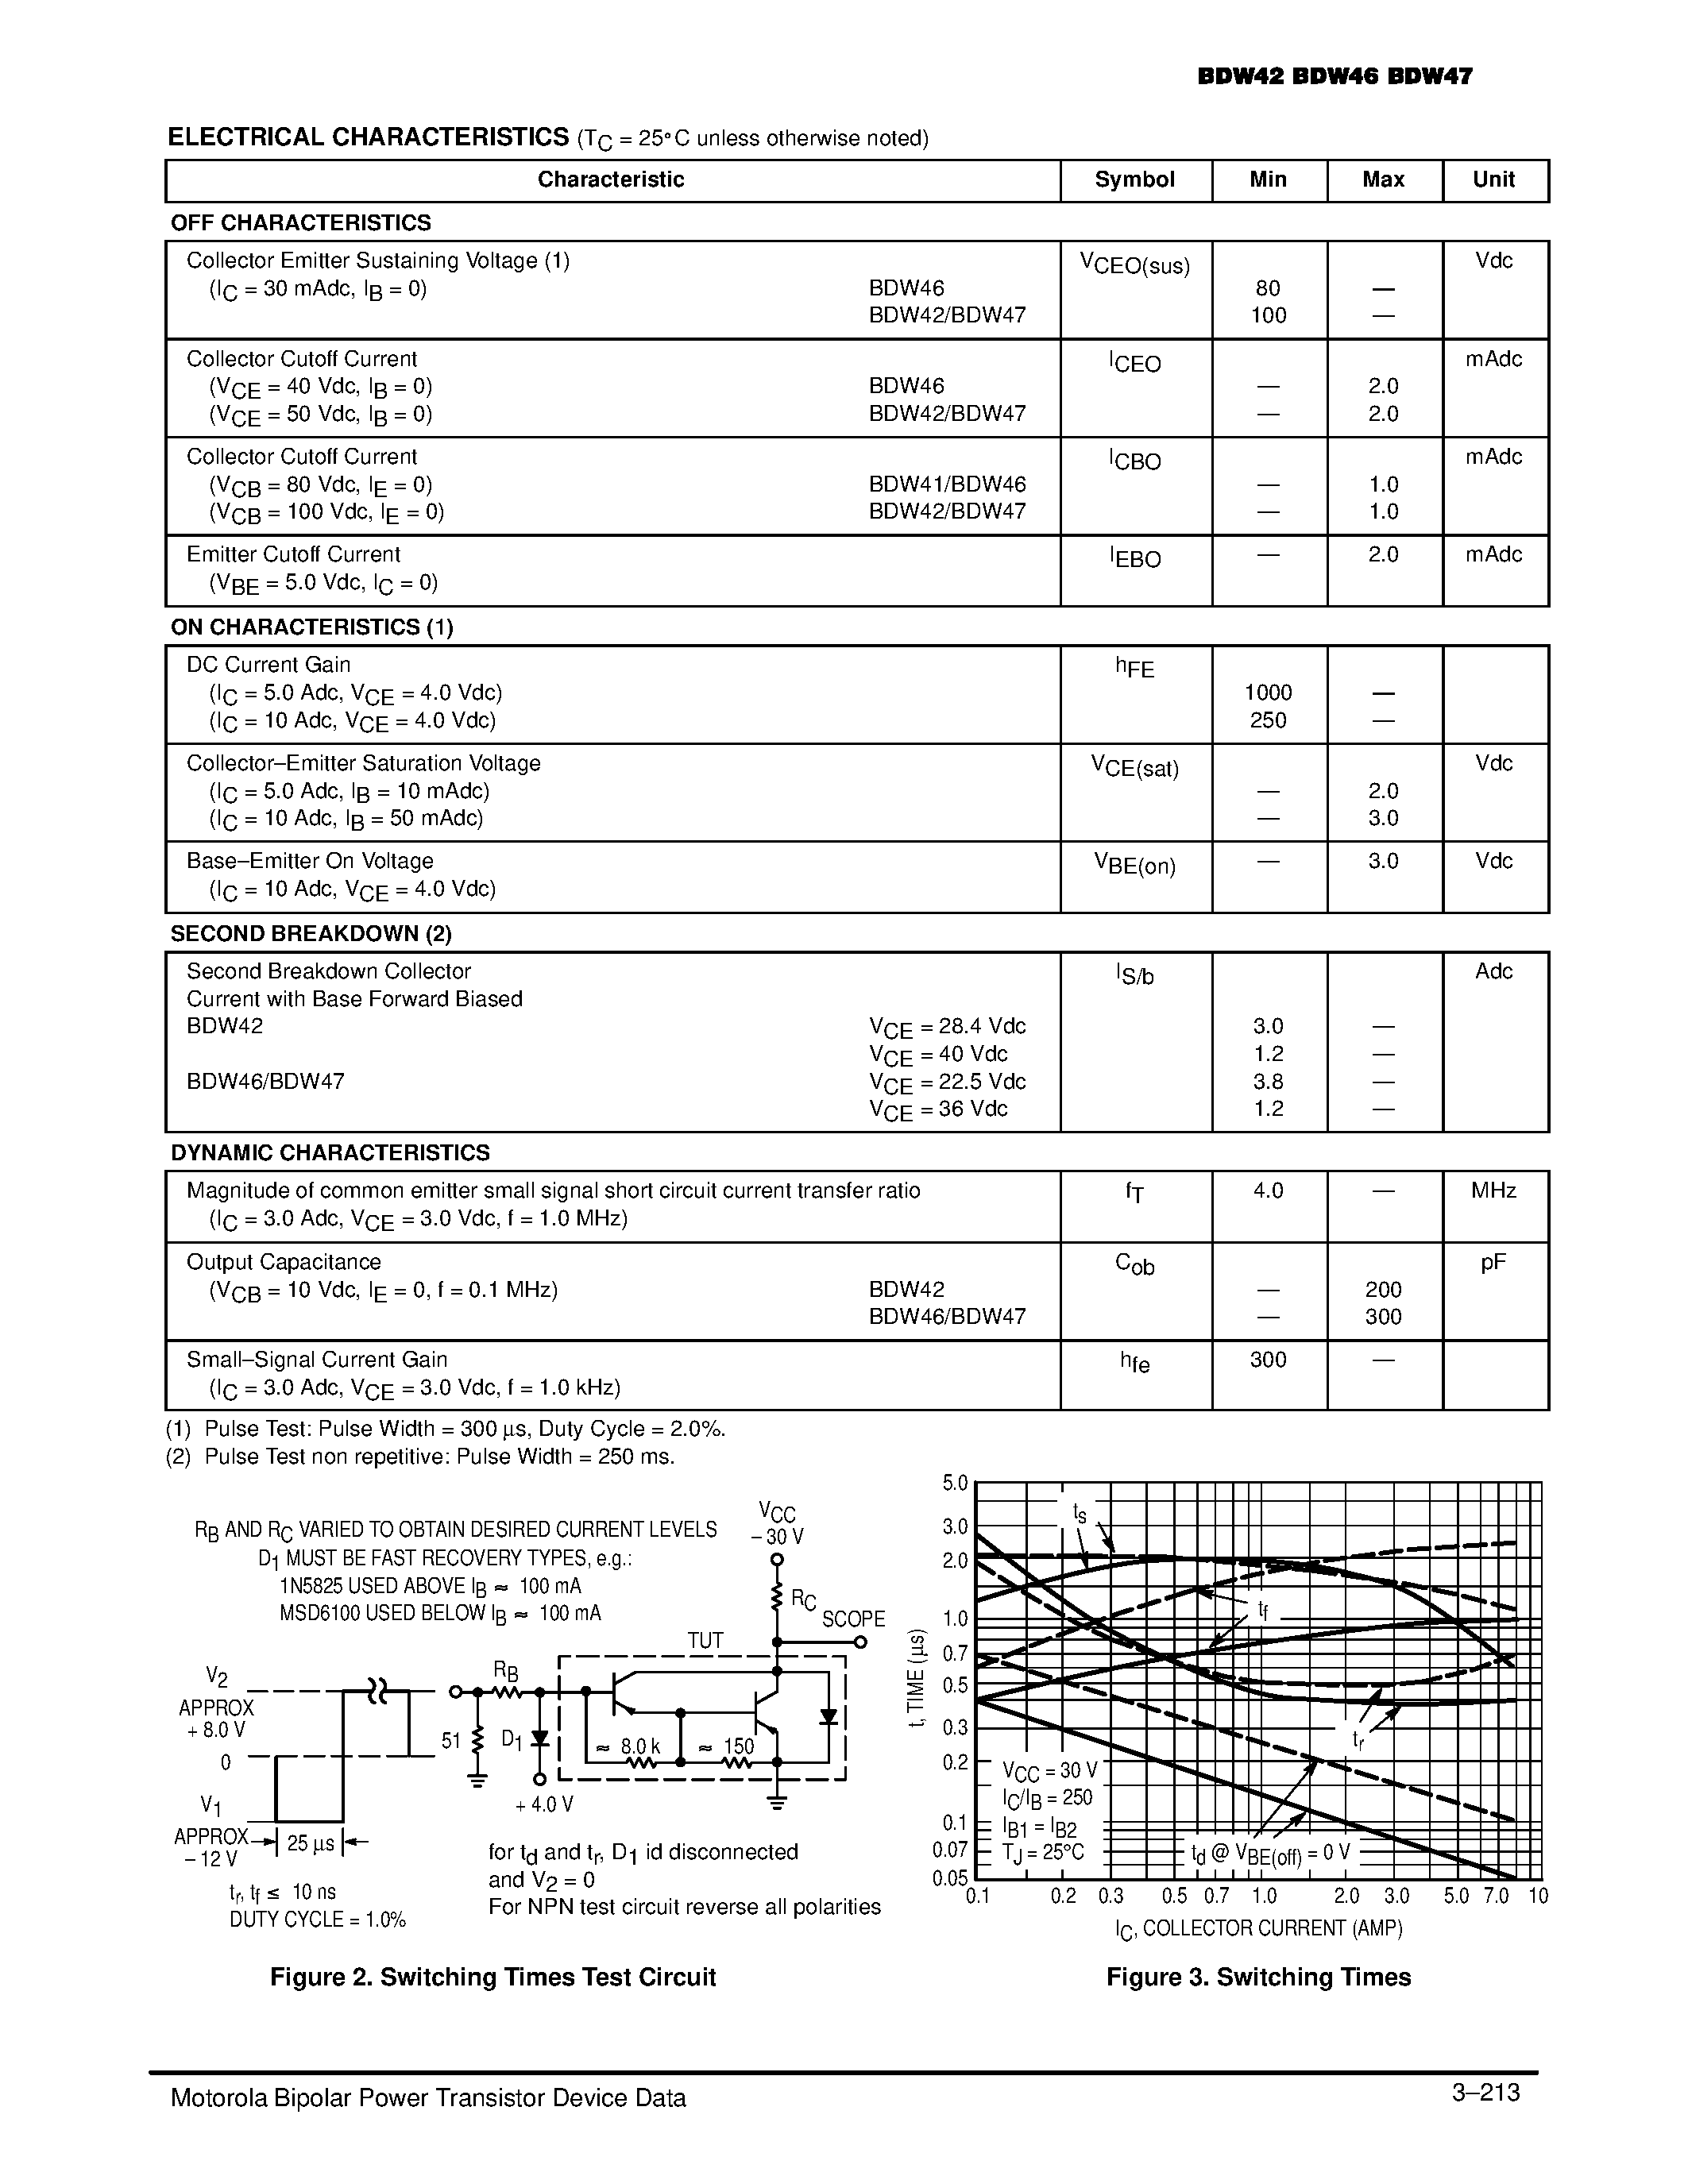 Datasheet BDW47 - DARLINGTON COMPLEMENTARY SILICON POWER TRANSISTORS page 2